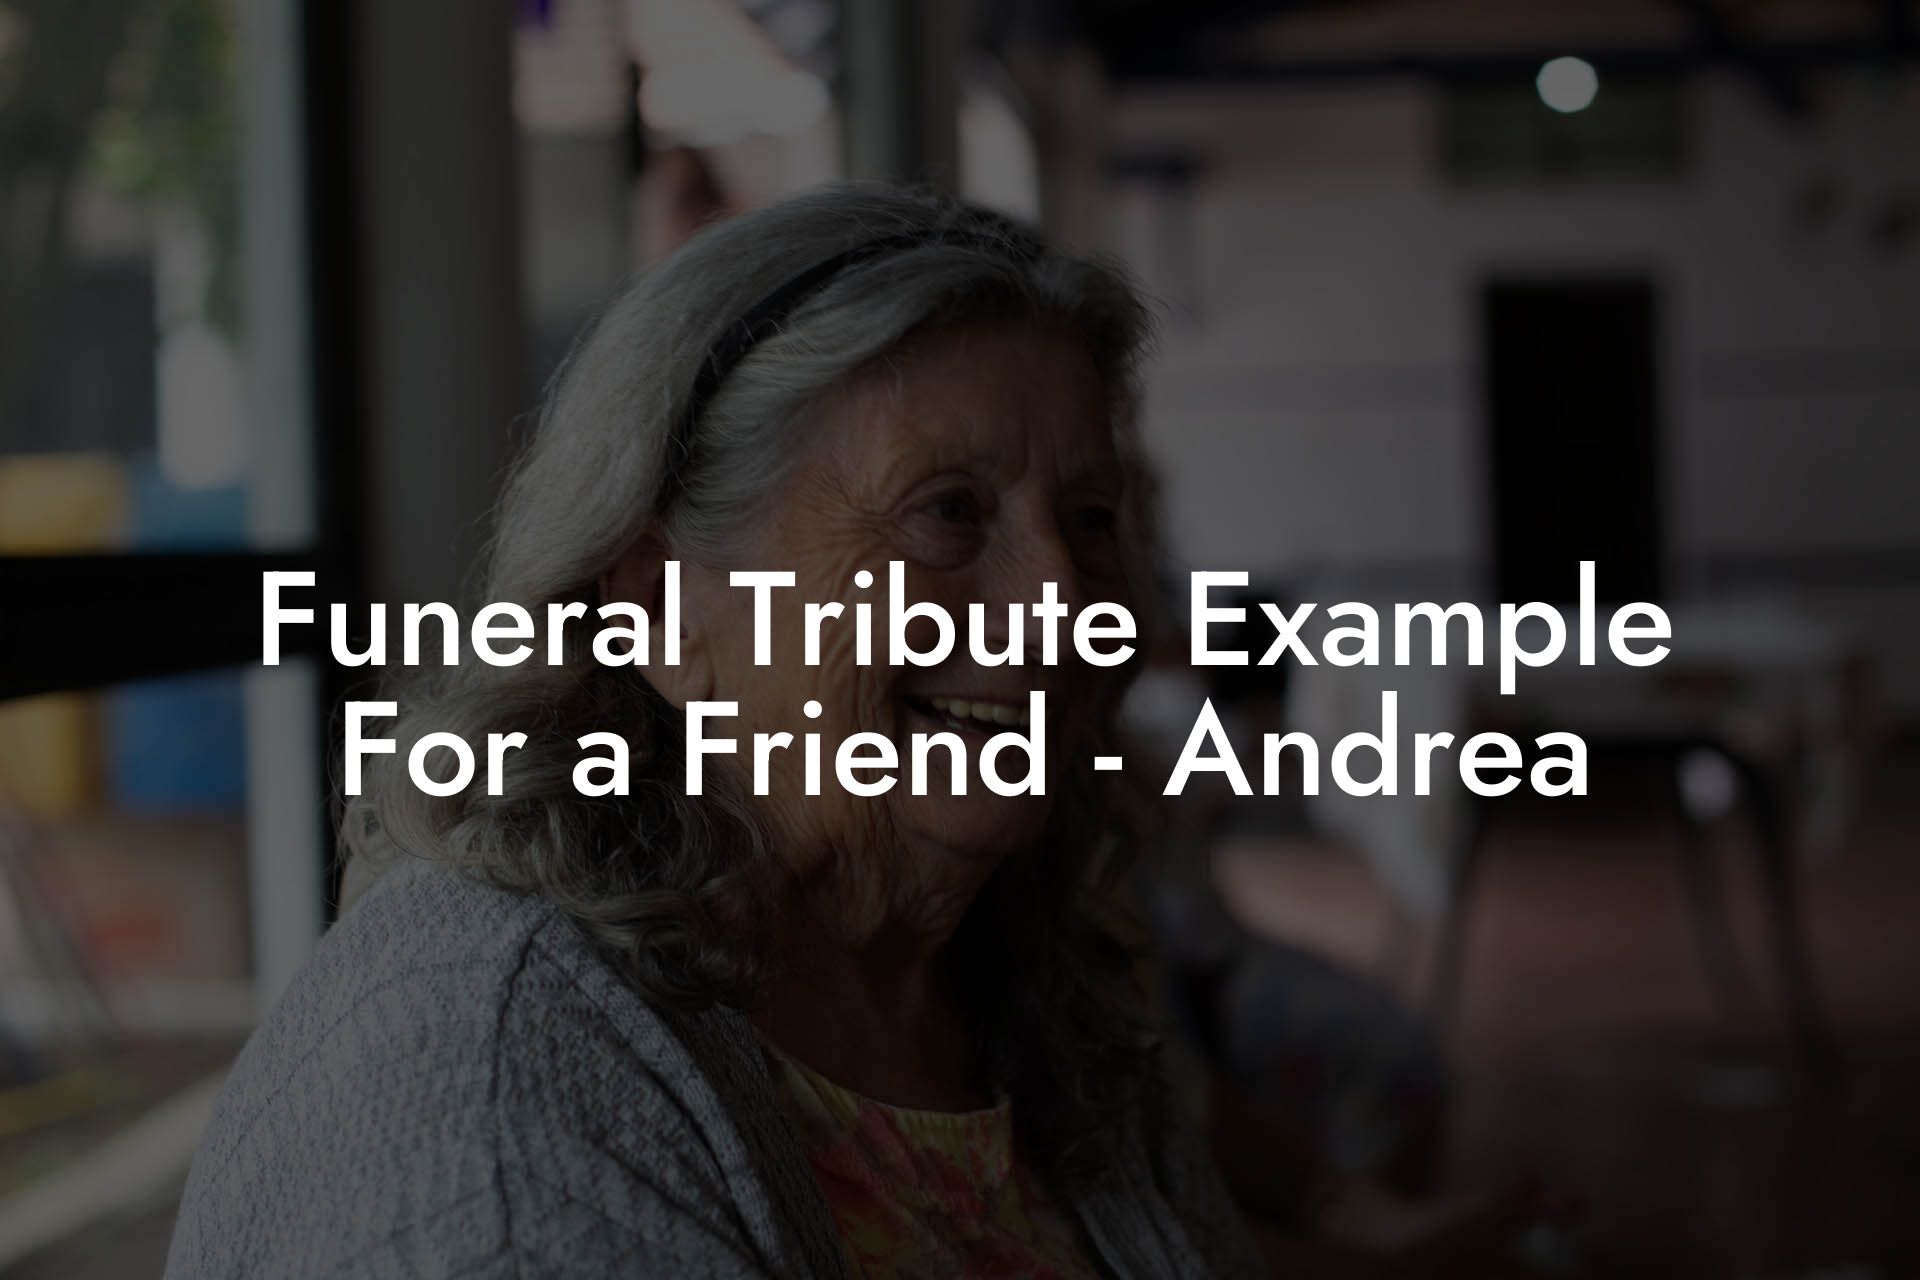 Funeral Tribute Example For a Friend - Andrea